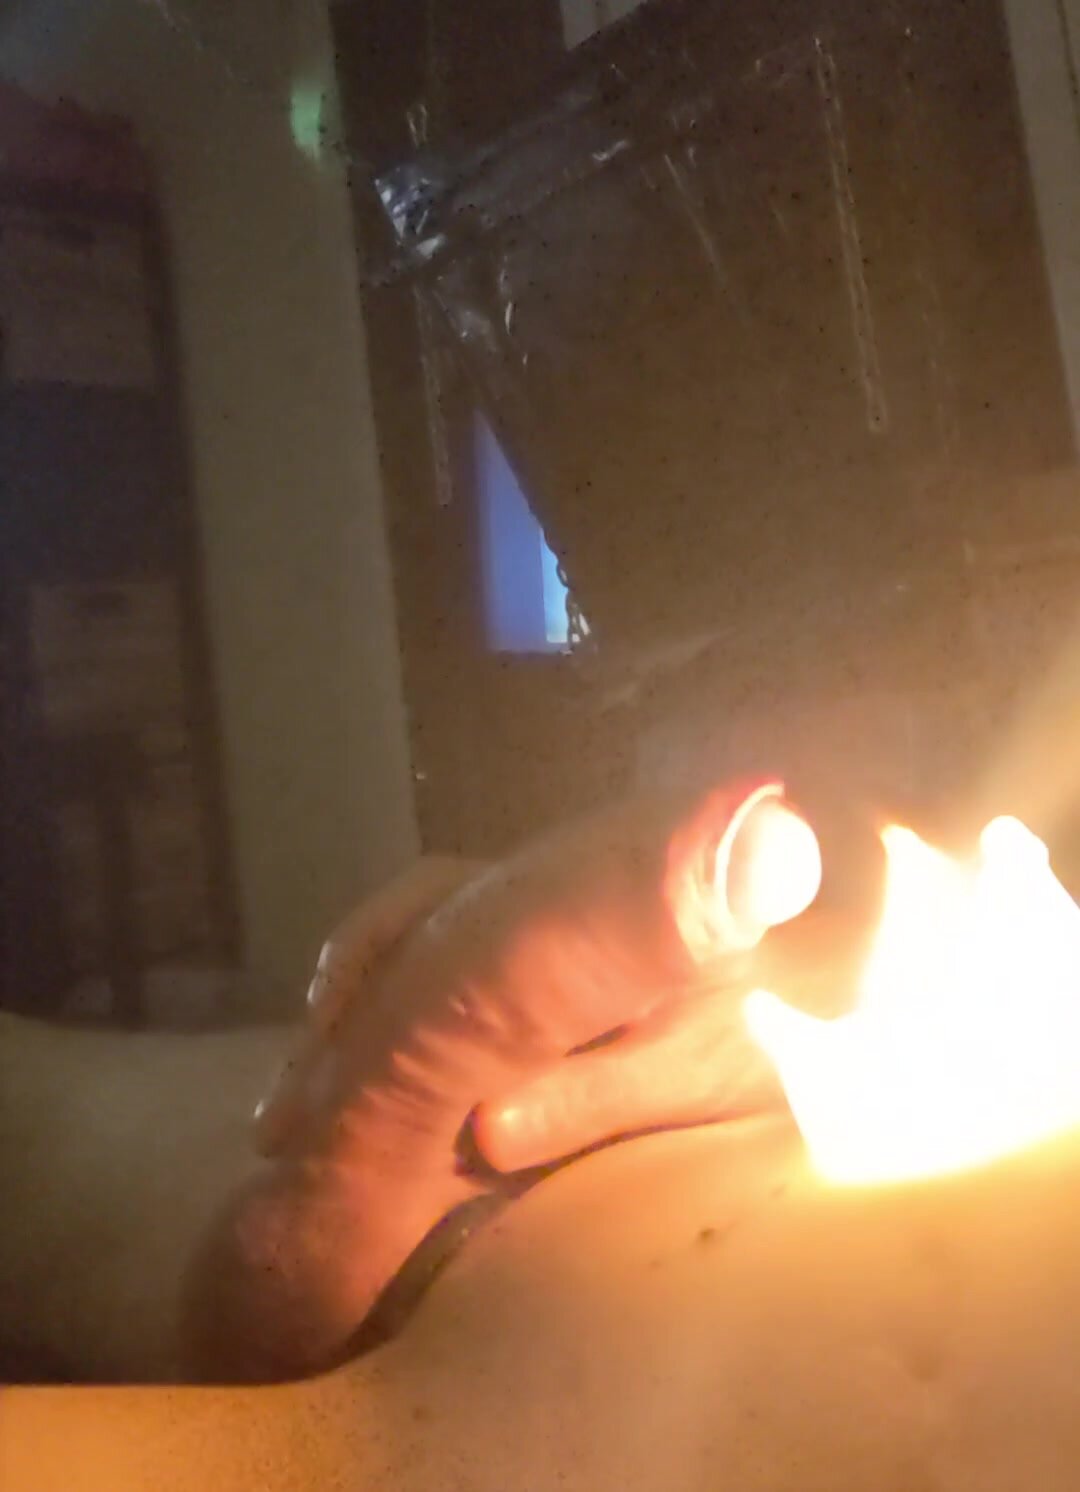 Jerking off dick over candle flame